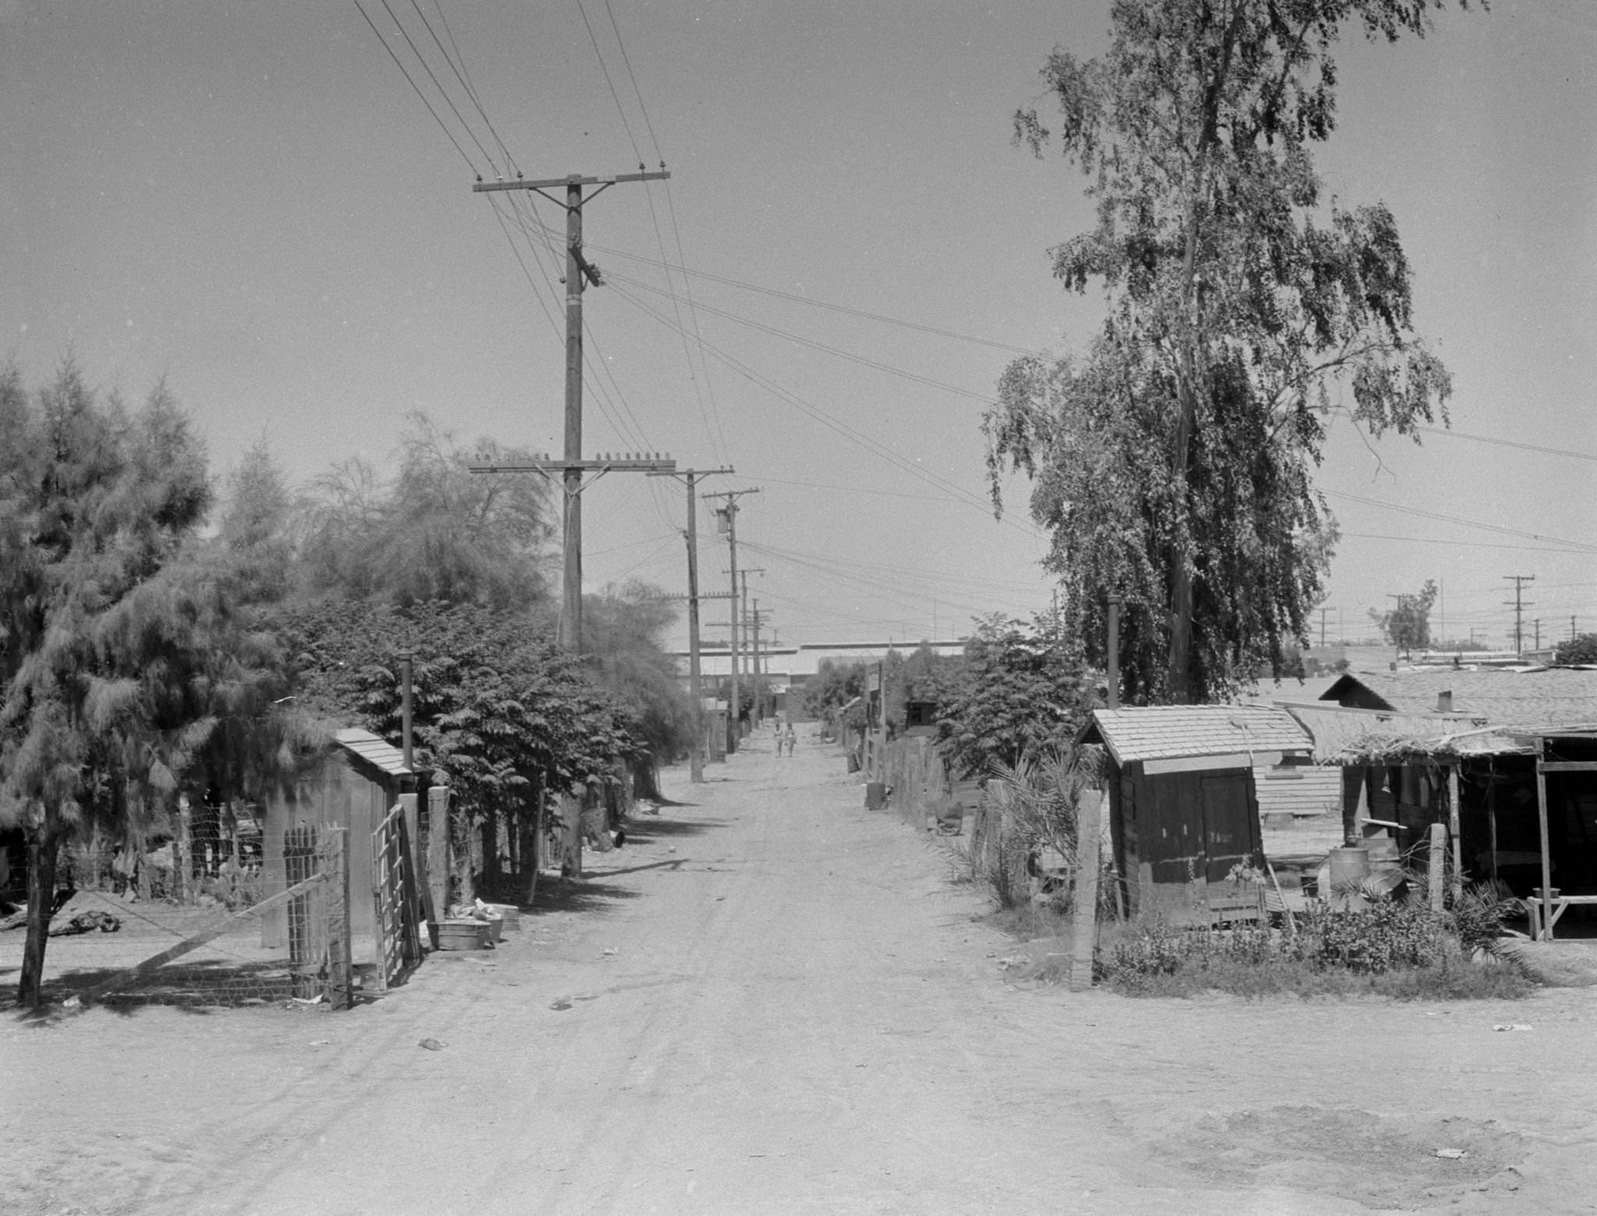 Slums of Brawley. Mexican field workers' homes. Imperial Valley, California, 1930s